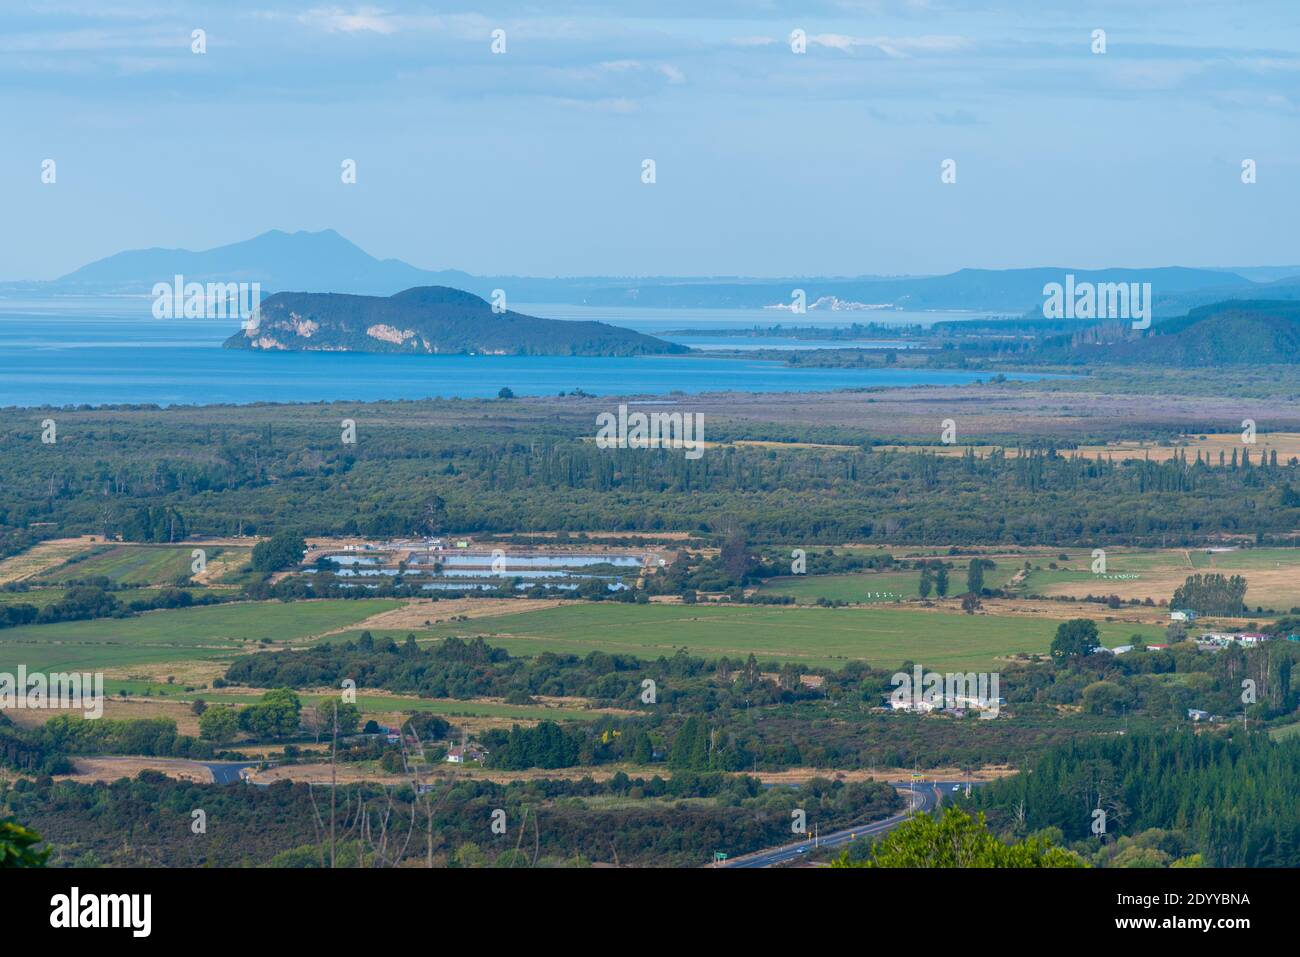 Aerial view of lake Taupo in New Zealand Stock Photo